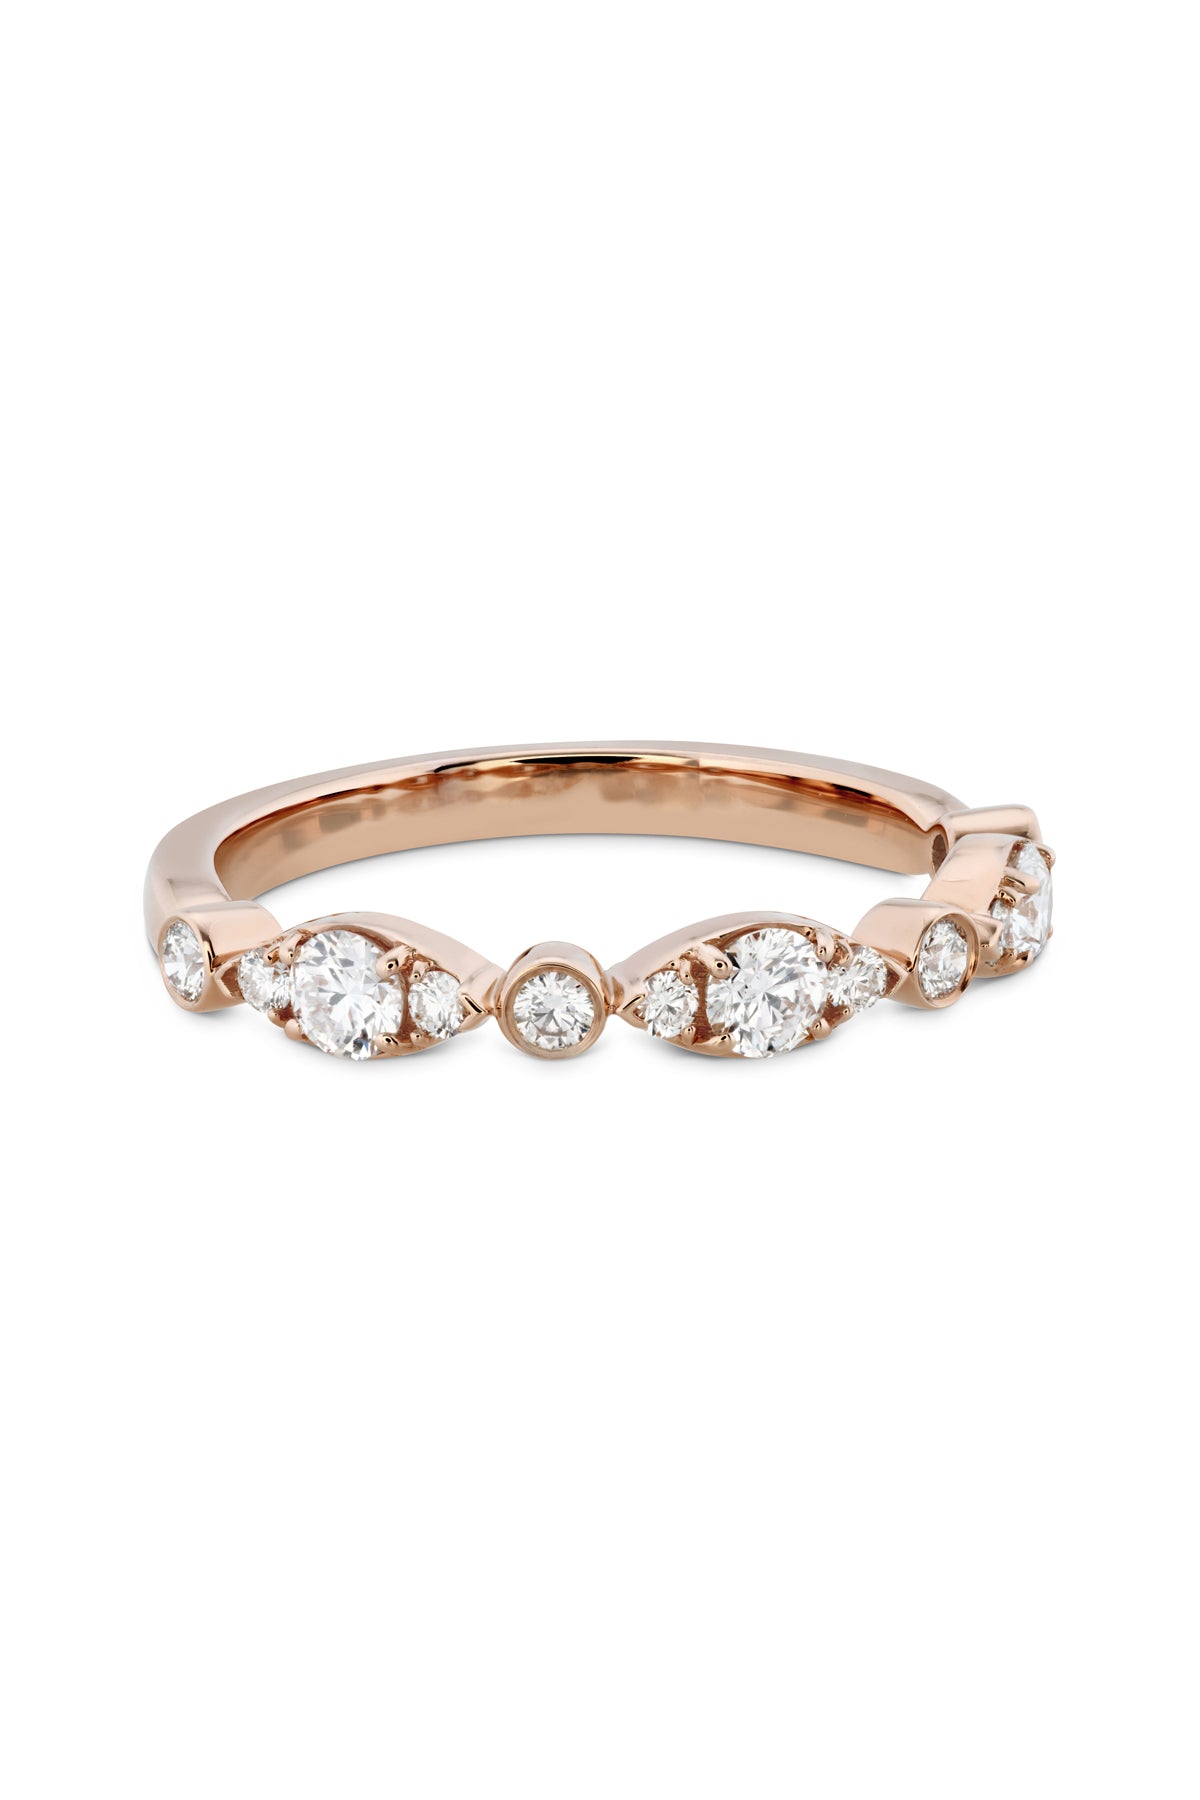 Bezel Regal Band From Hearts On Fire available at LeGassick Diamonds and Jewellery Gold Coast, Australia.